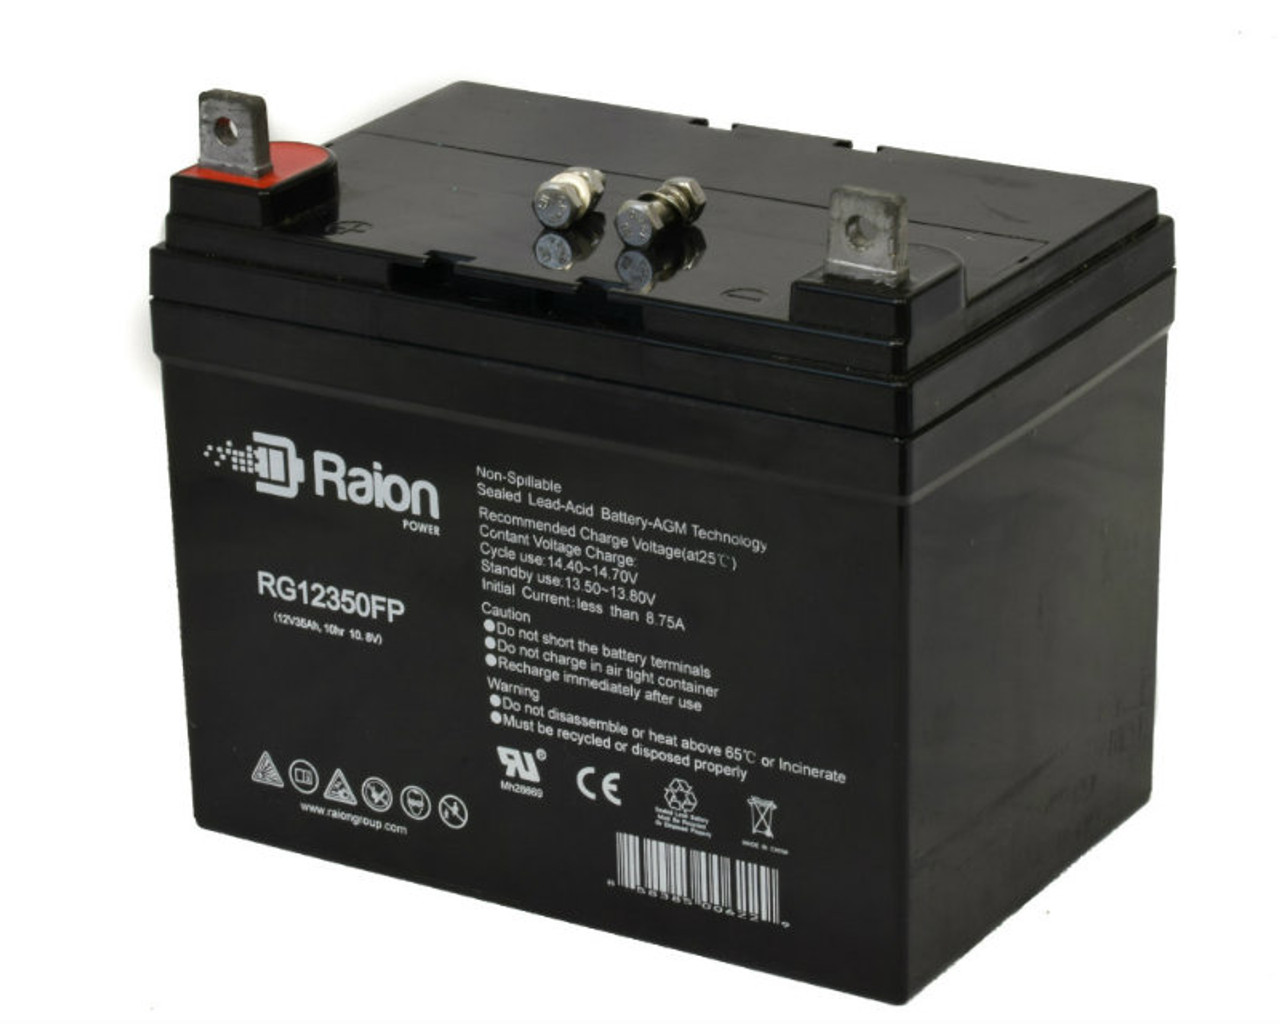 Raion Power Replacement 12V 35Ah RG12350FP Mobility Scooter Battery for Quickie P190 AGM